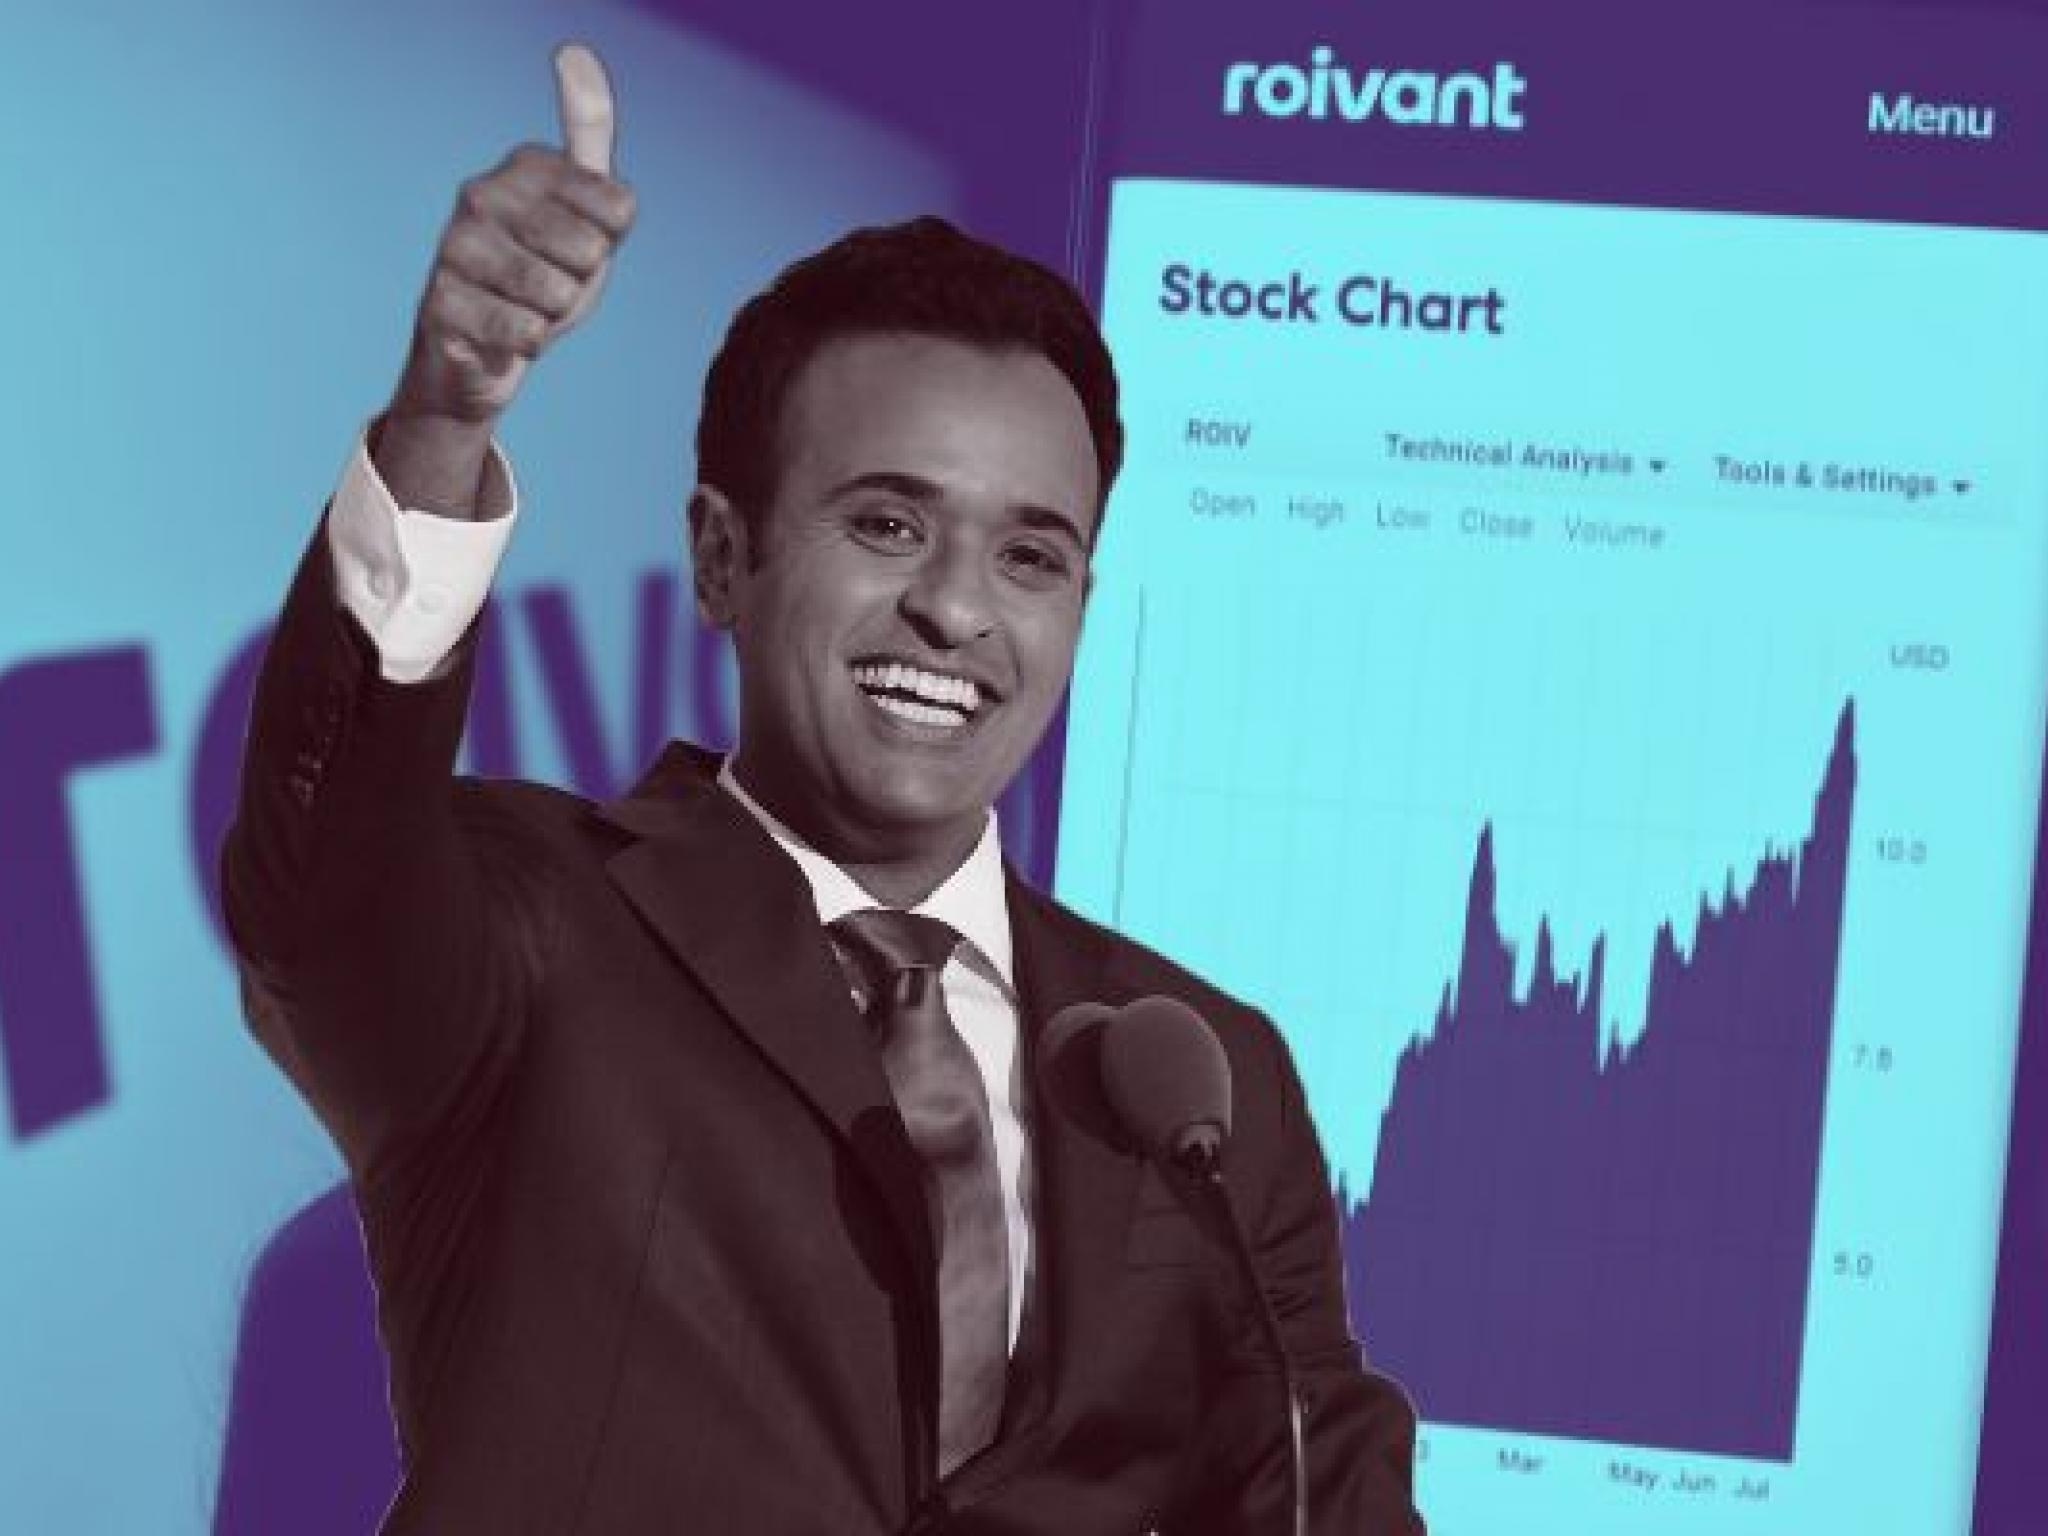  if-you-invested-1000-in-vivek-ramaswamy-founded-roivant-when-he-declared-presidential-bid-heres-how-much-youd-have-now 